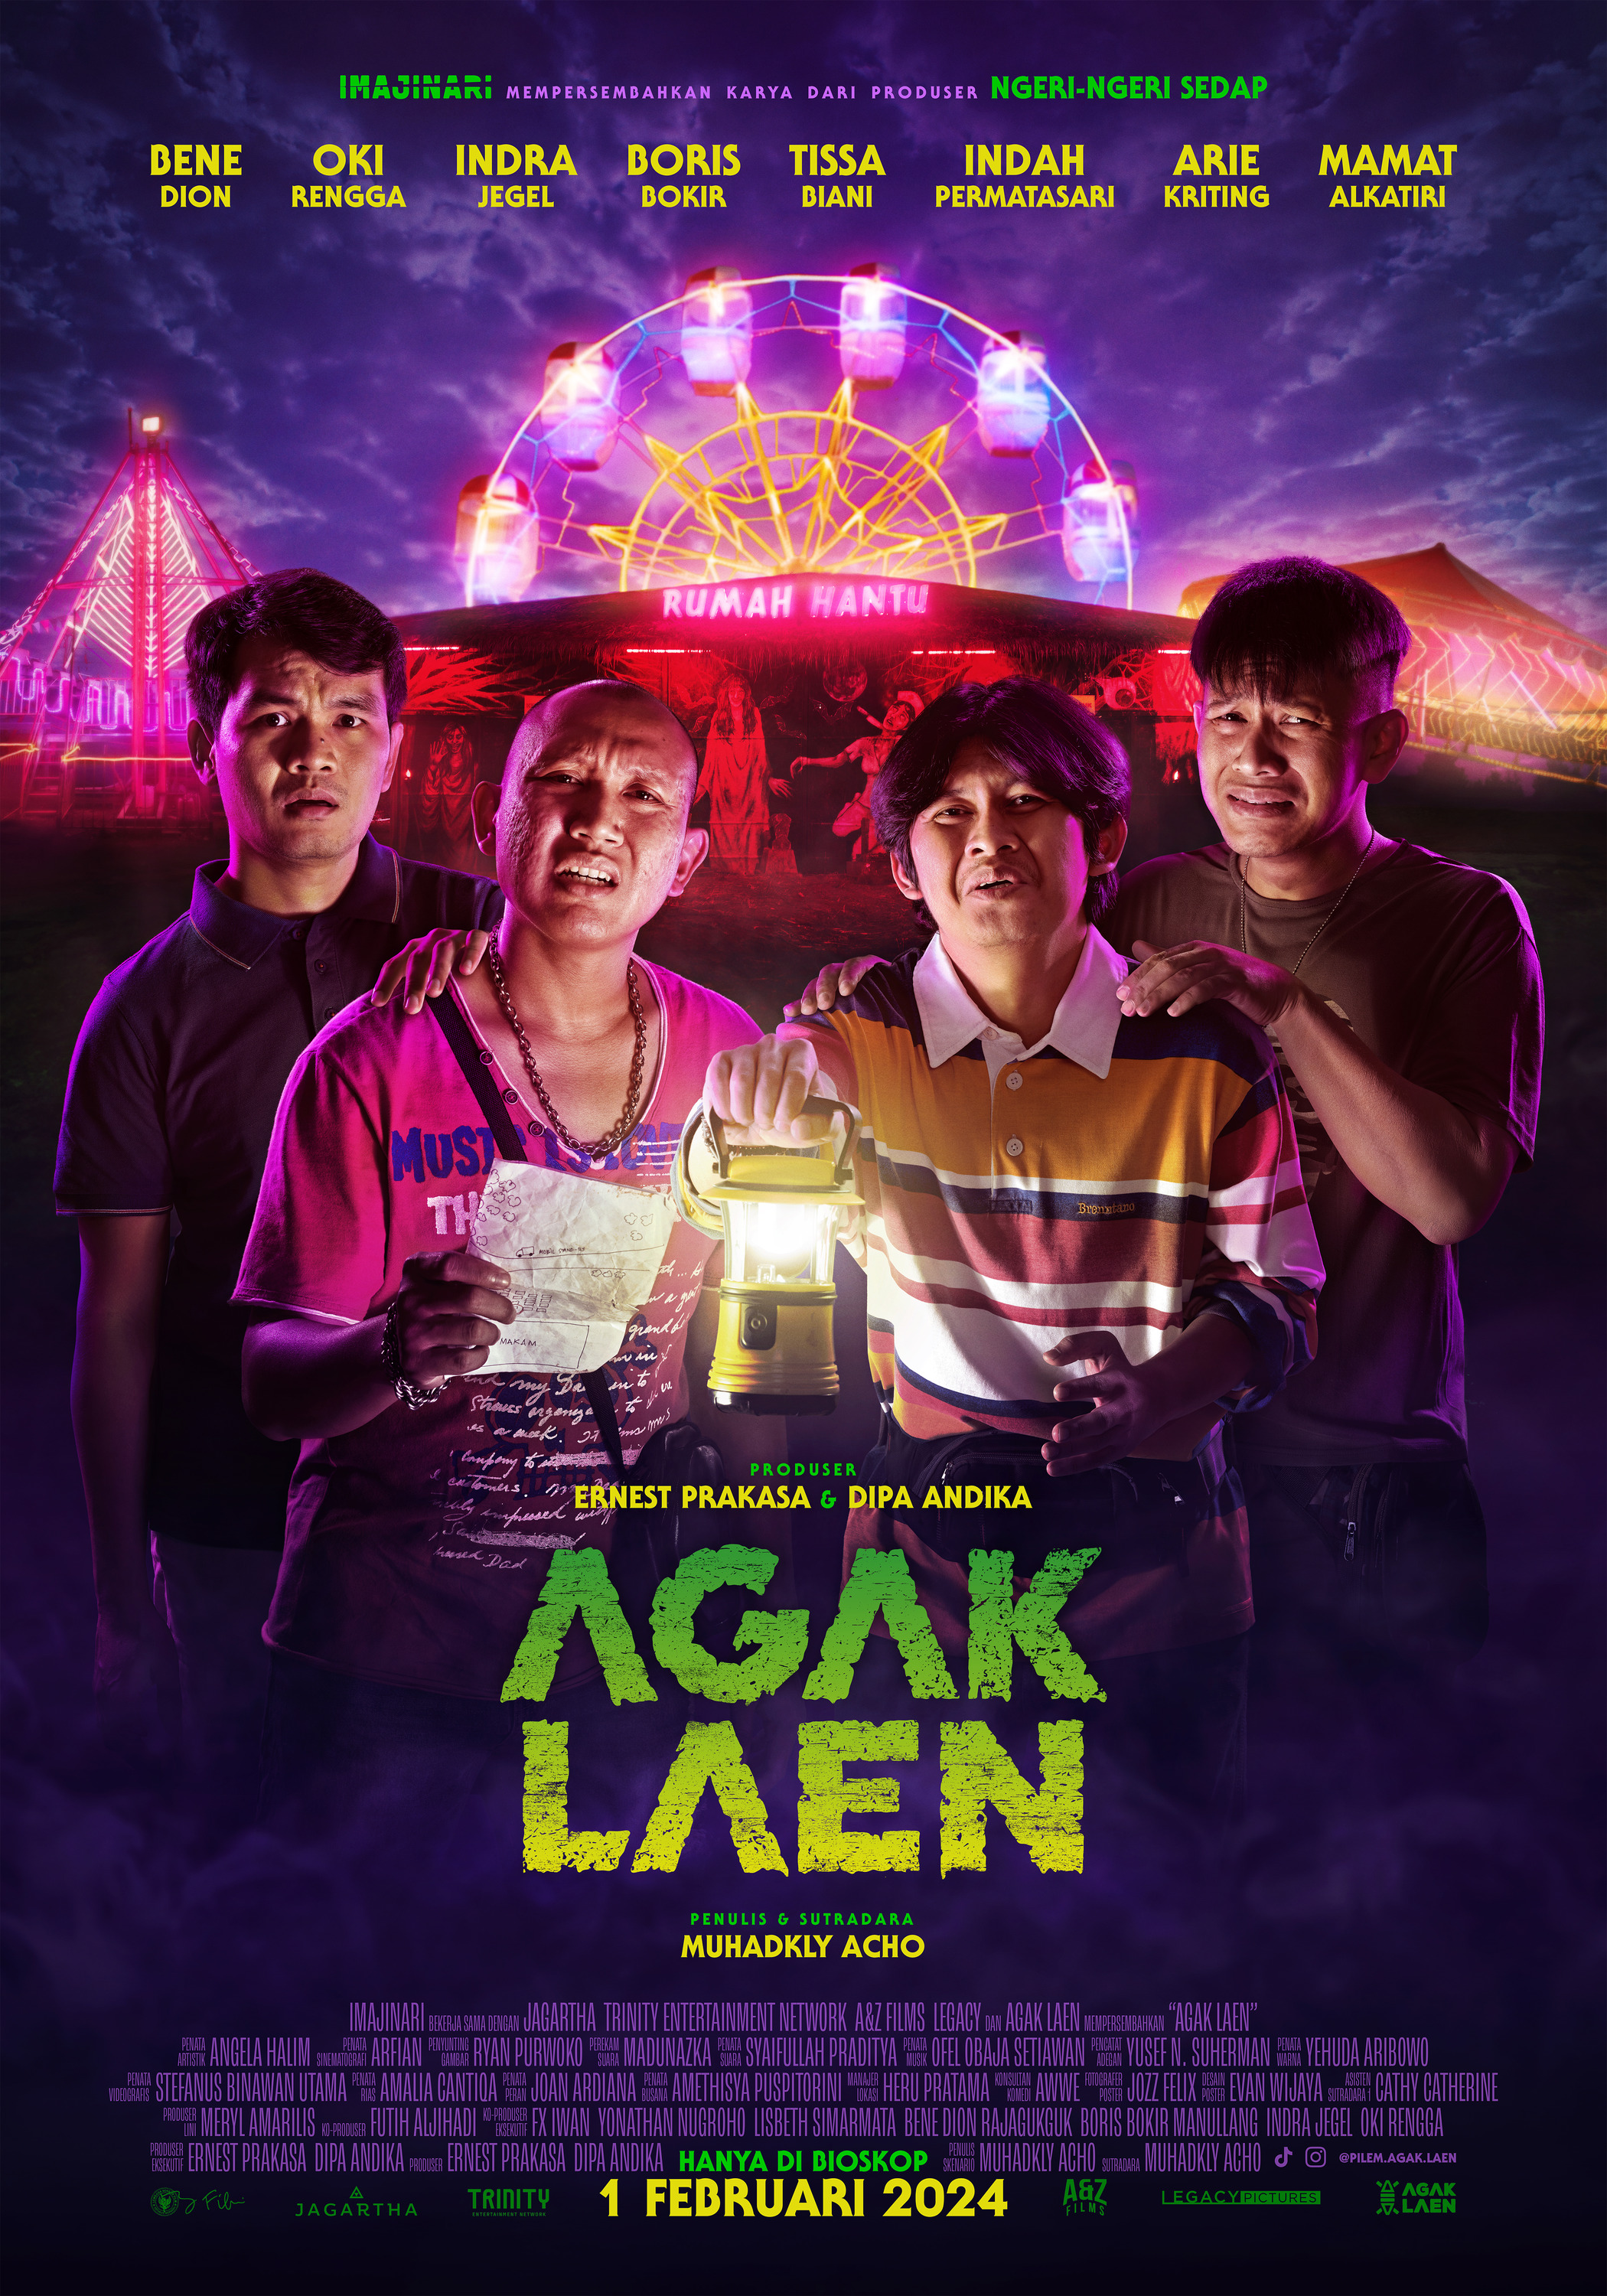 Mega Sized Movie Poster Image for Agak Laen (#2 of 2)